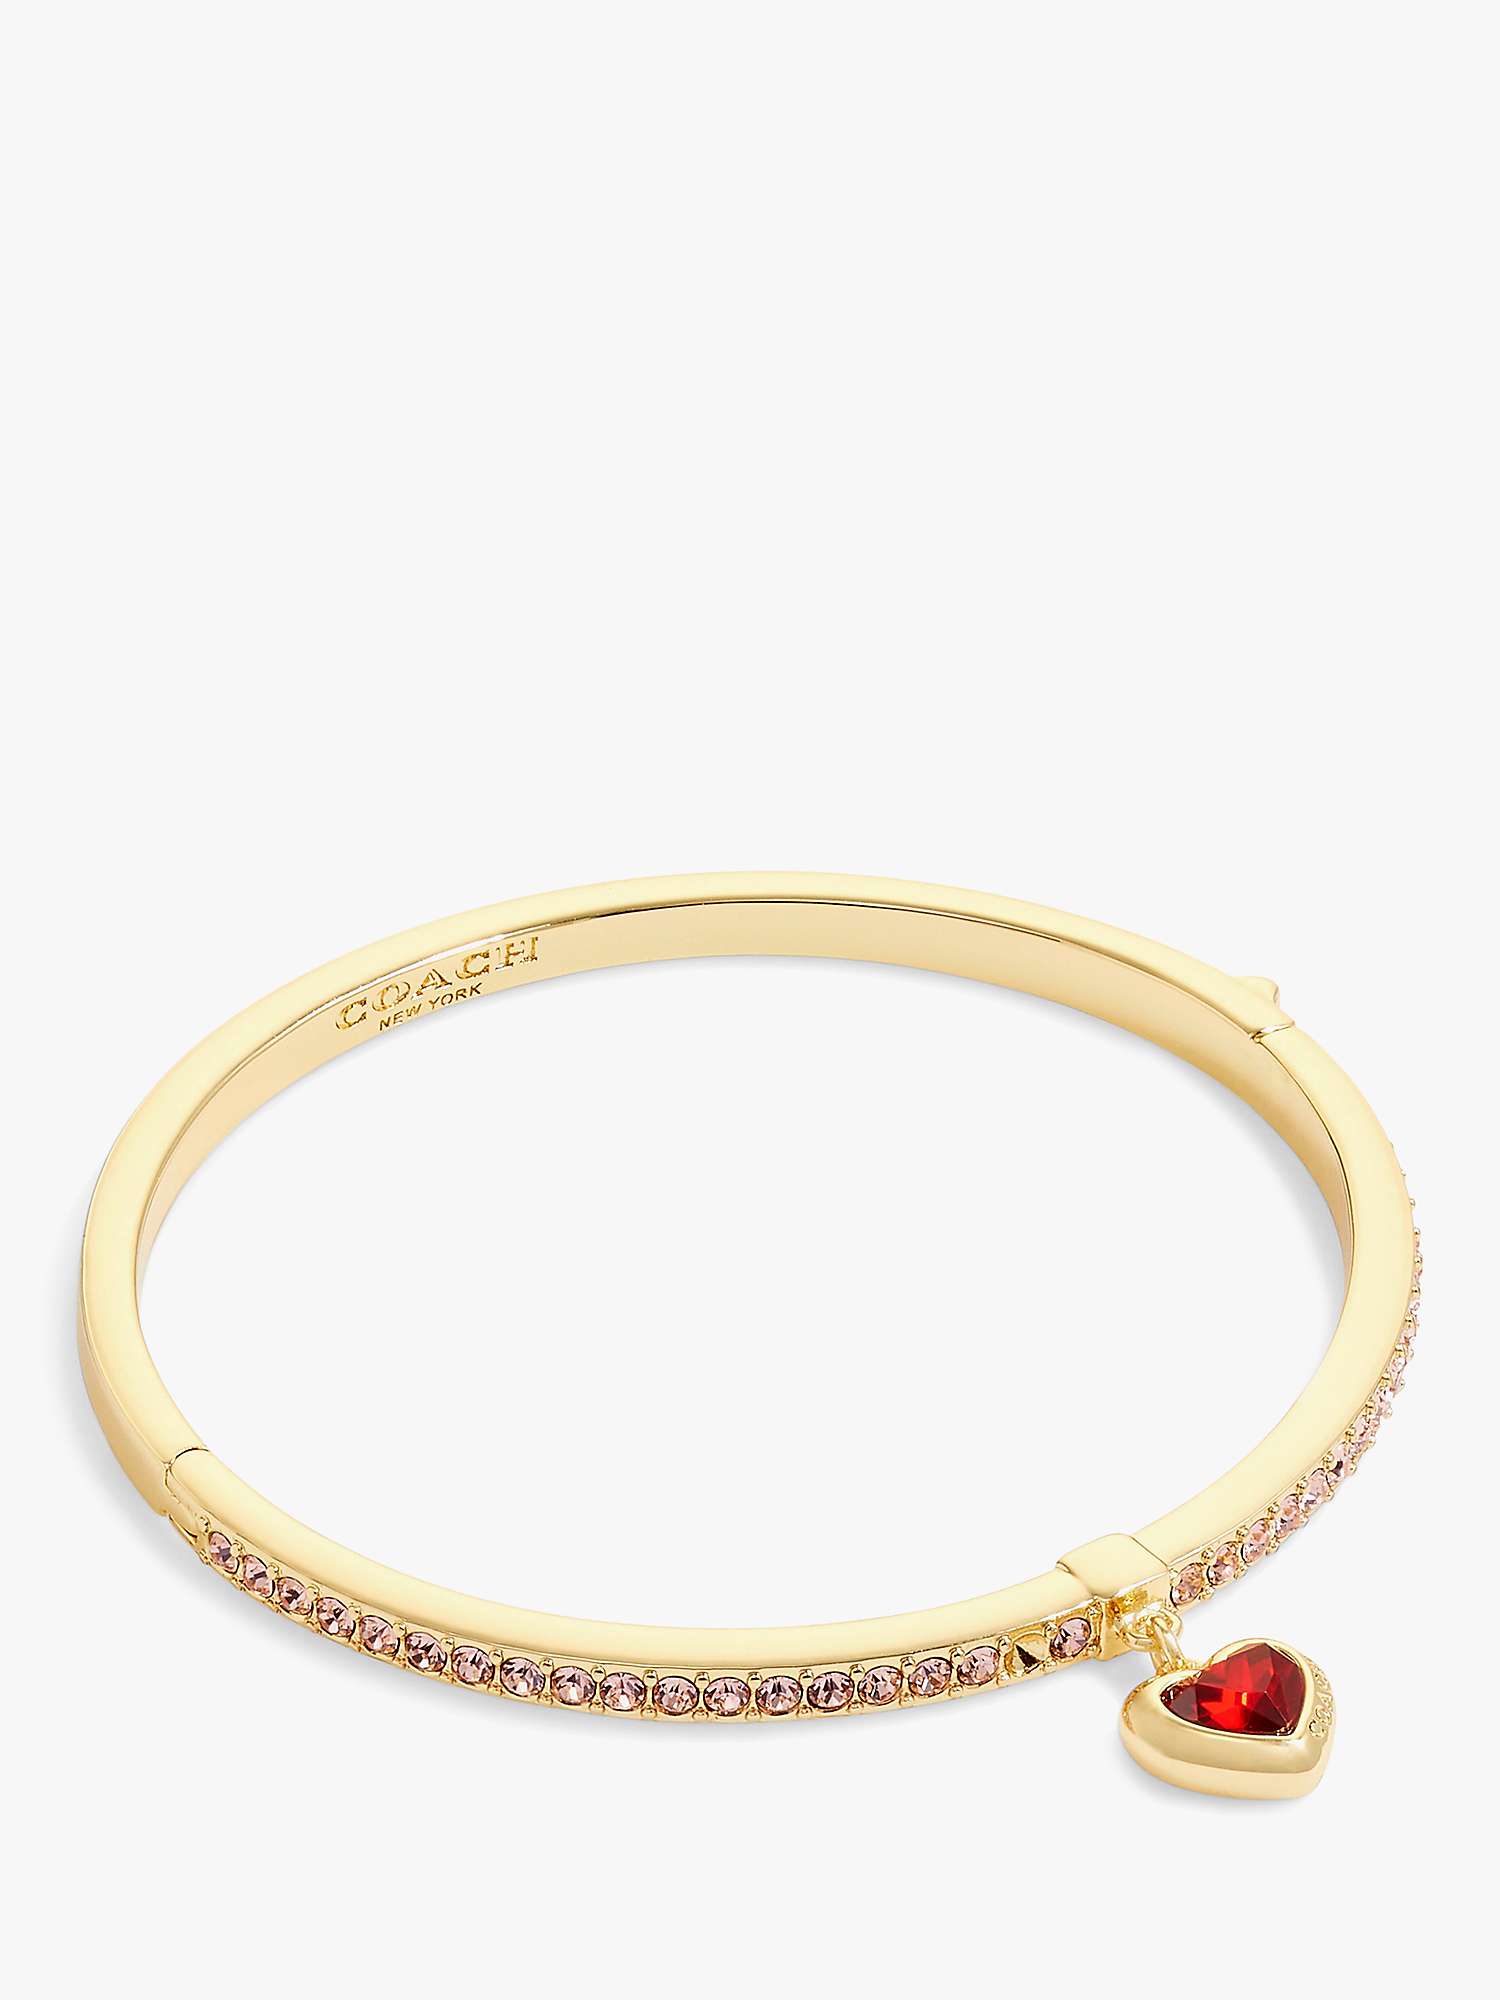 Buy Coach Crystal Heart Bangle, Gold/Red Online at johnlewis.com